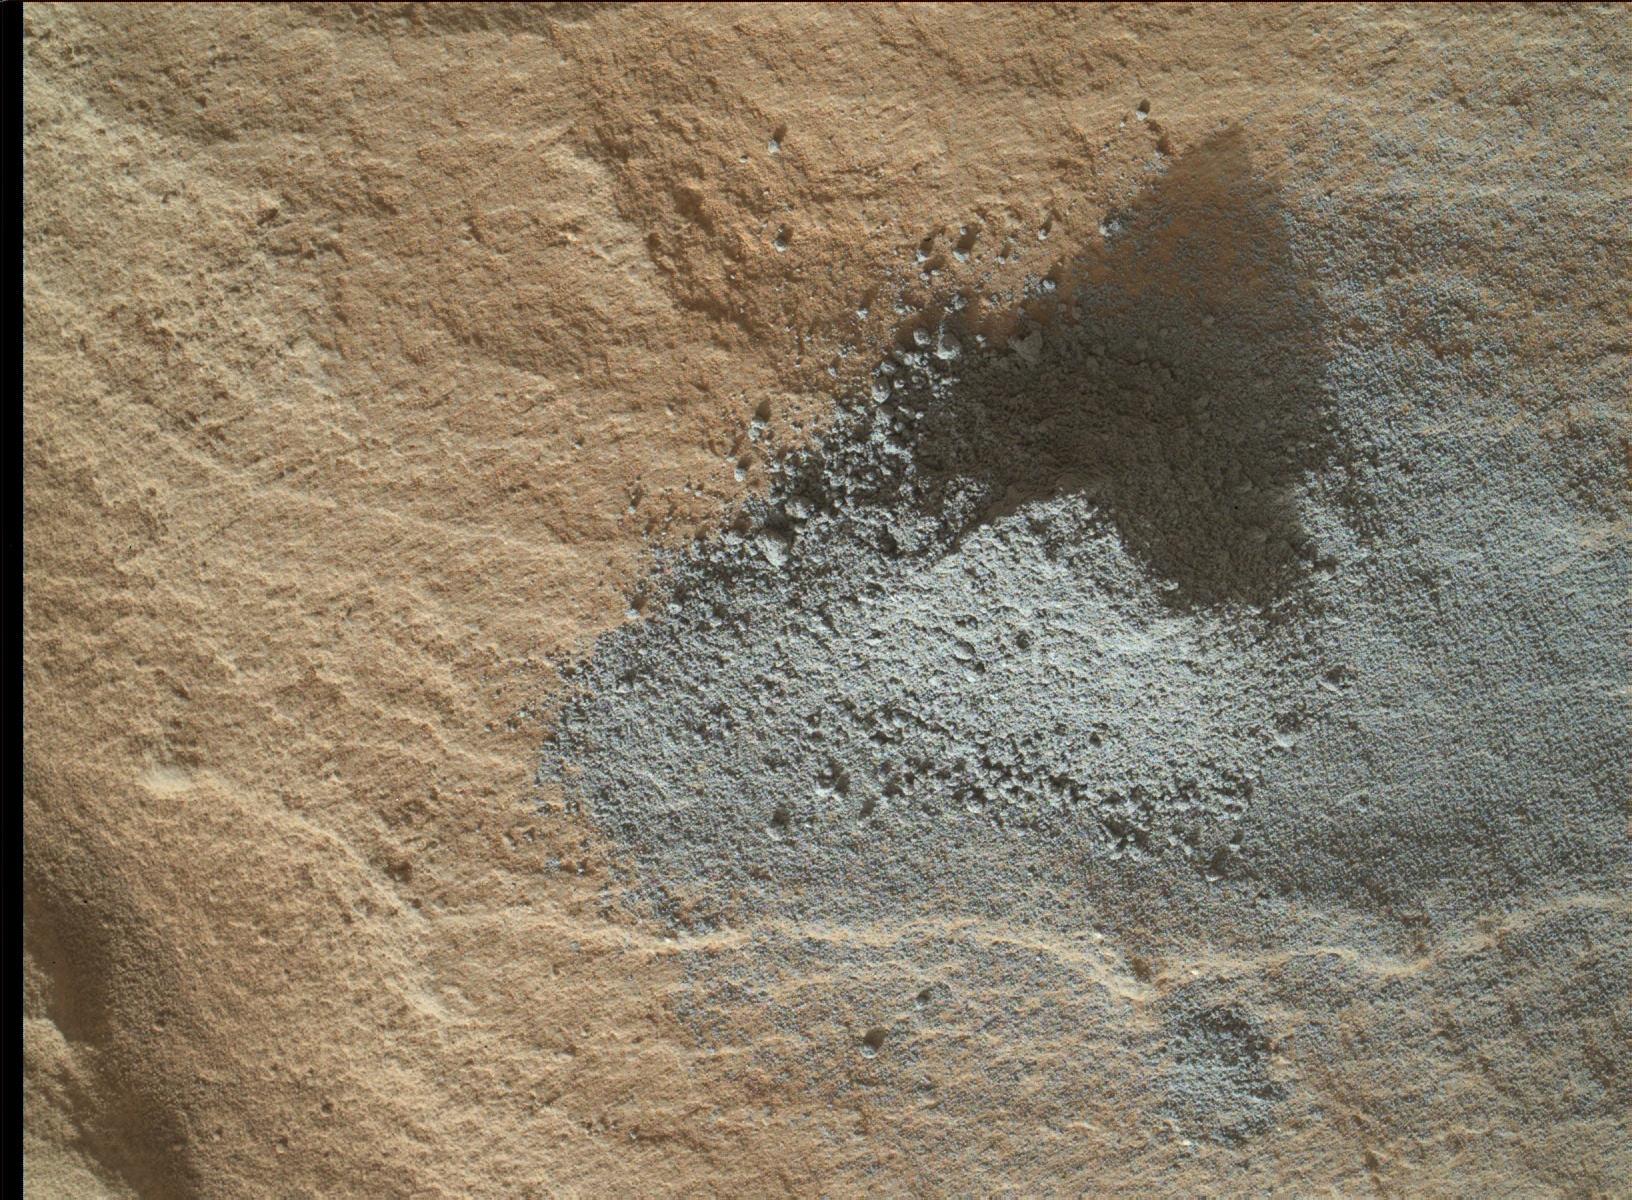 Nasa's Mars rover Curiosity acquired this image using its Mars Hand Lens Imager (MAHLI) on Sol 1132